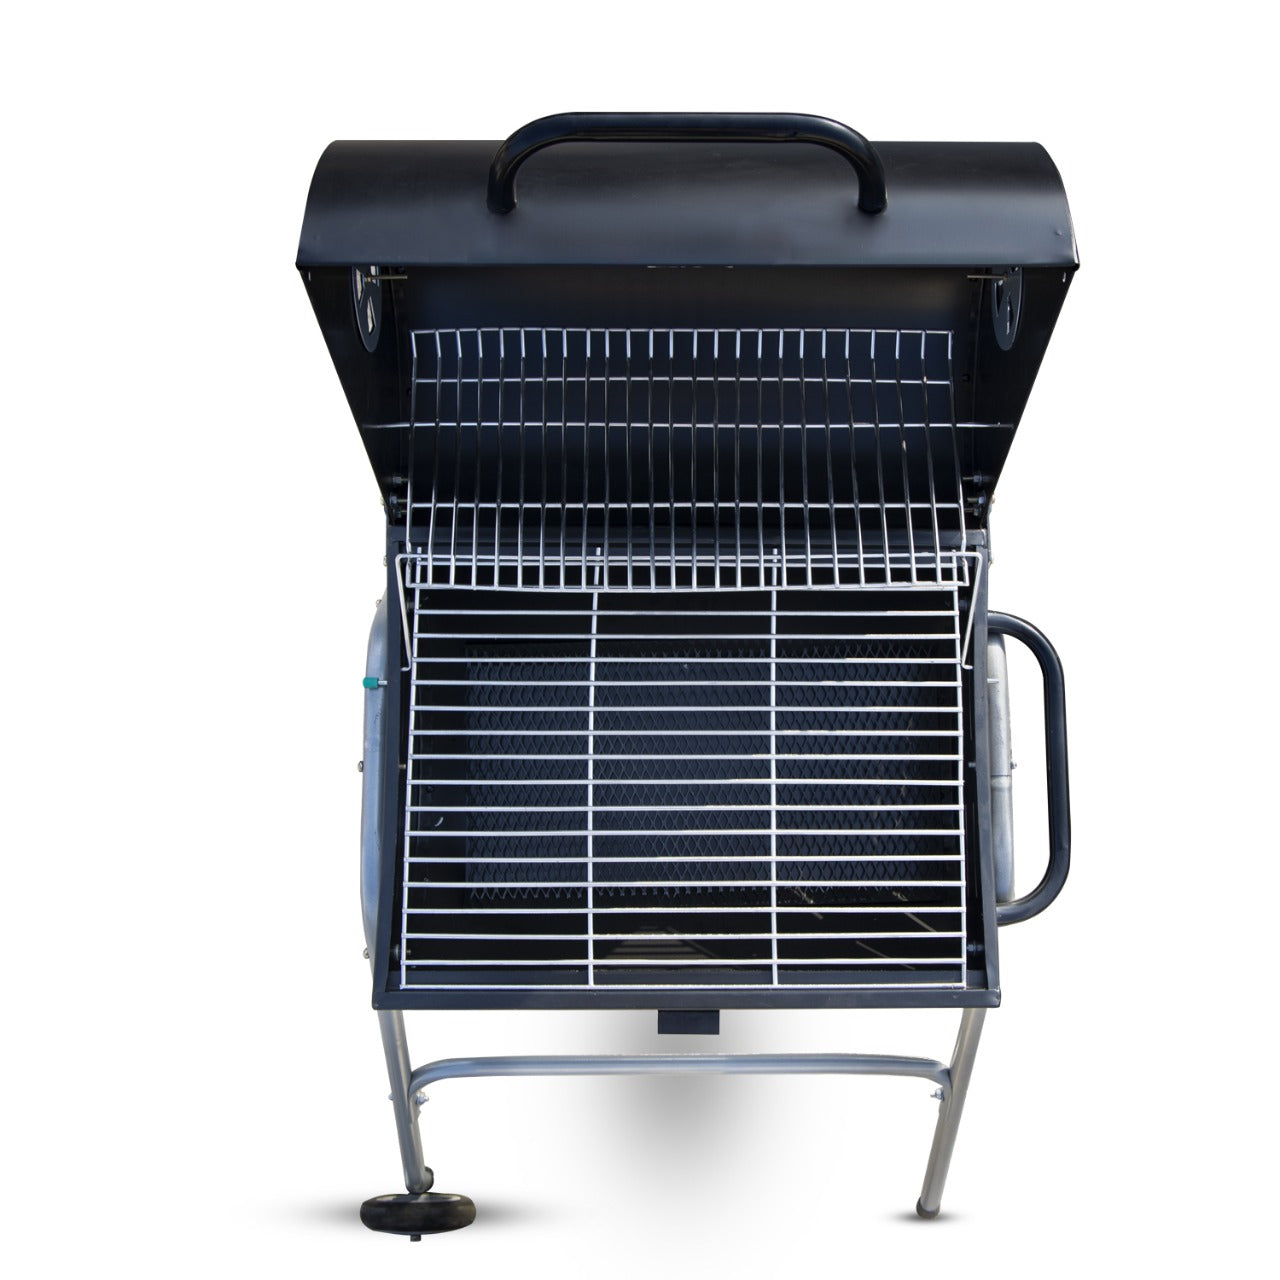 Charcoal Compact Barbecue with Wheels